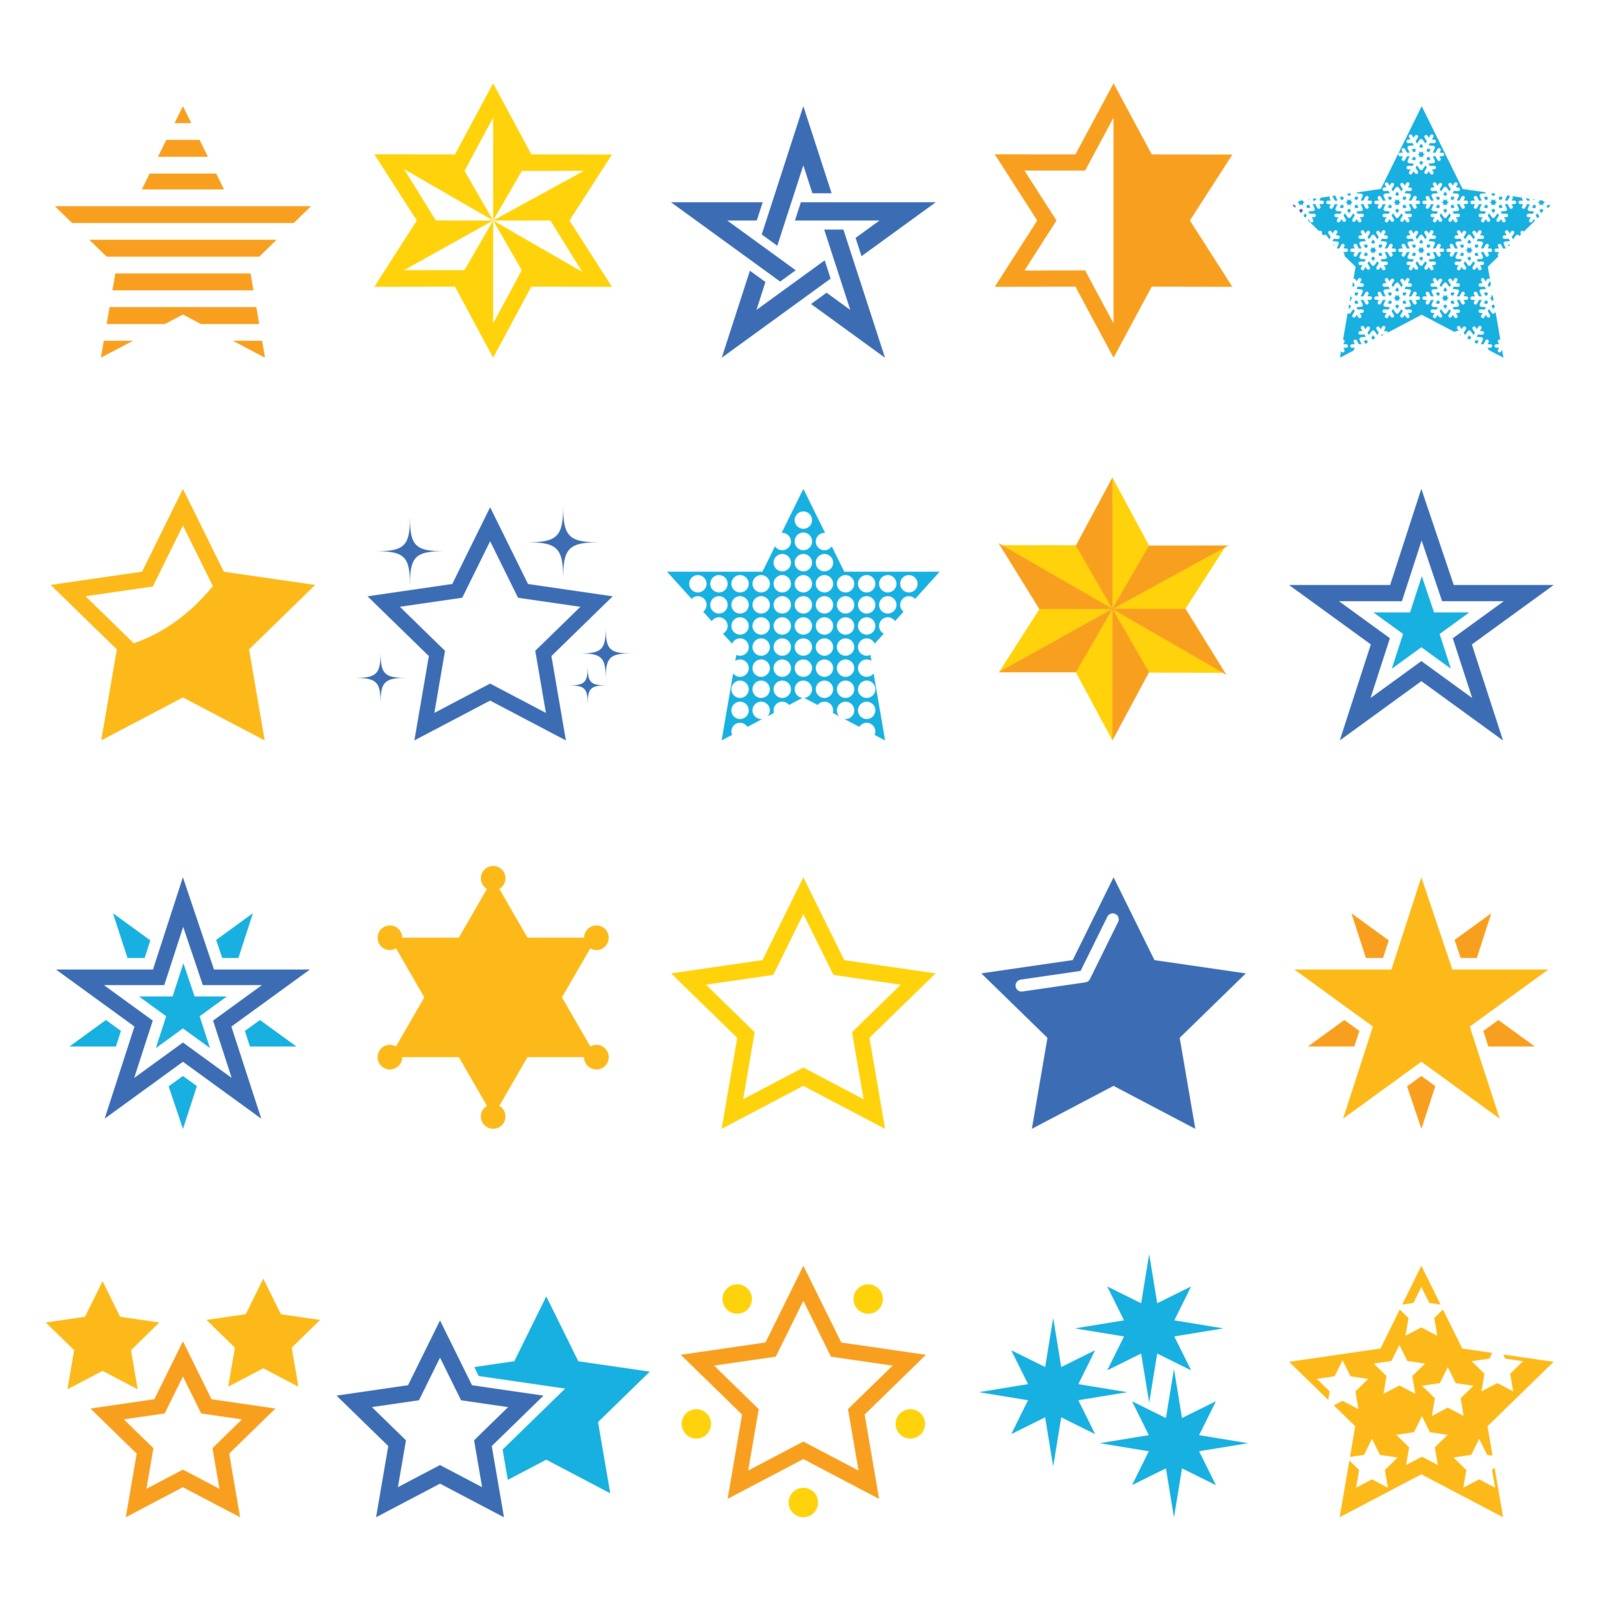 Stars gold and blue vector icons by RedKoala